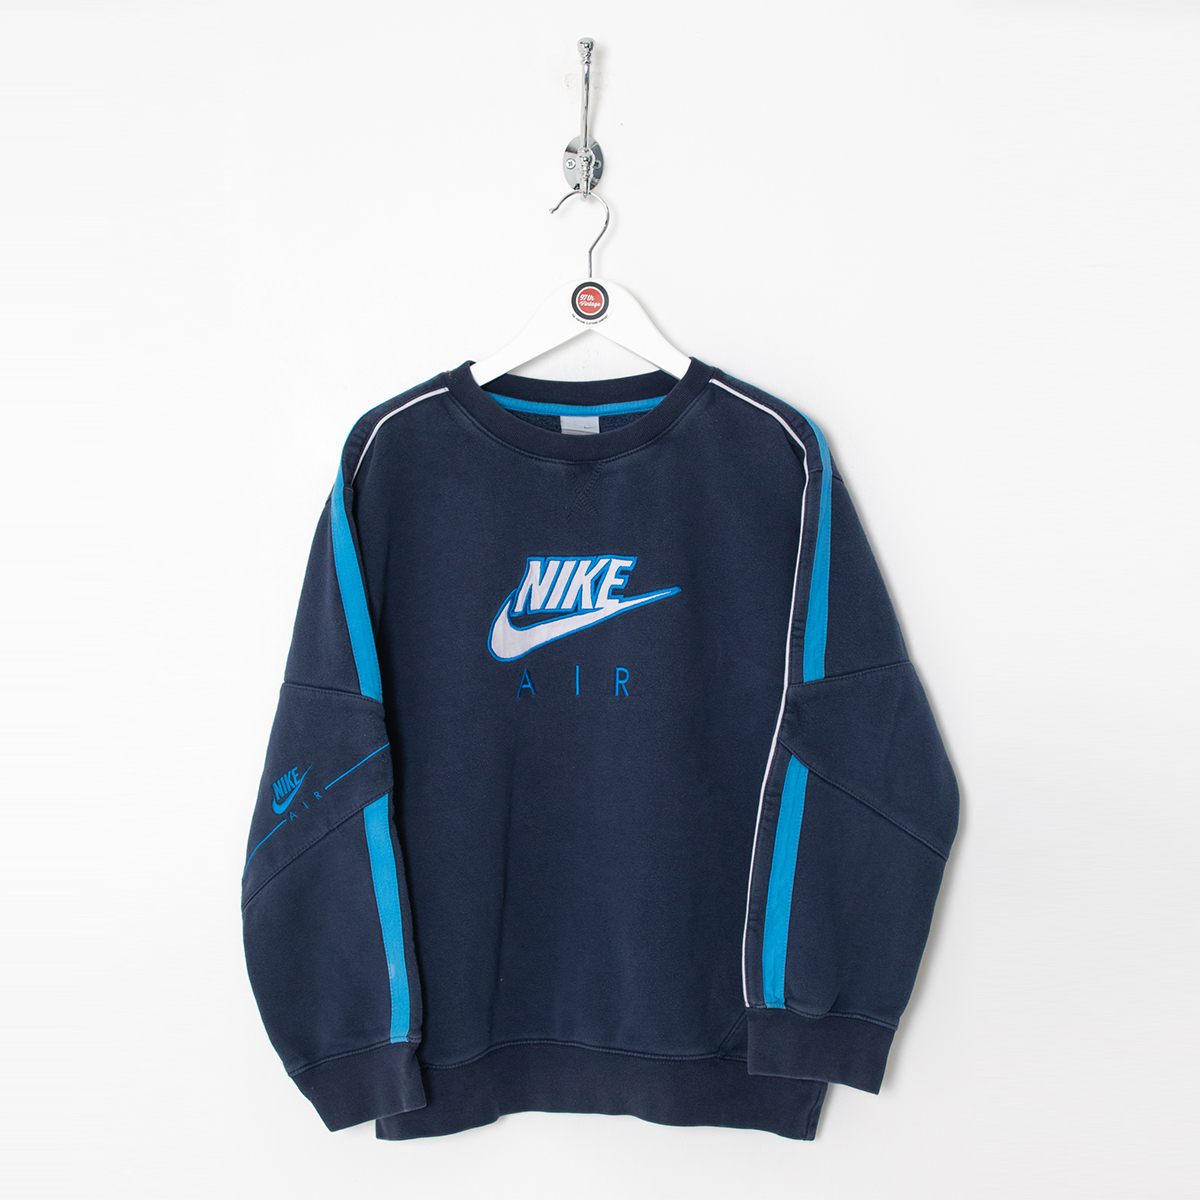 97th Vintage on Twitter: "Time for a Nike and Adidas Sweatshirts online NOW! Which one is your fave?💥 &gt; https://t.co/Jf7BZM4baC #97thvintage #vintagefashion #Nike #adidas #vintage #style #streetwear https://t.co/5bAvA3bzrm" / Twitter